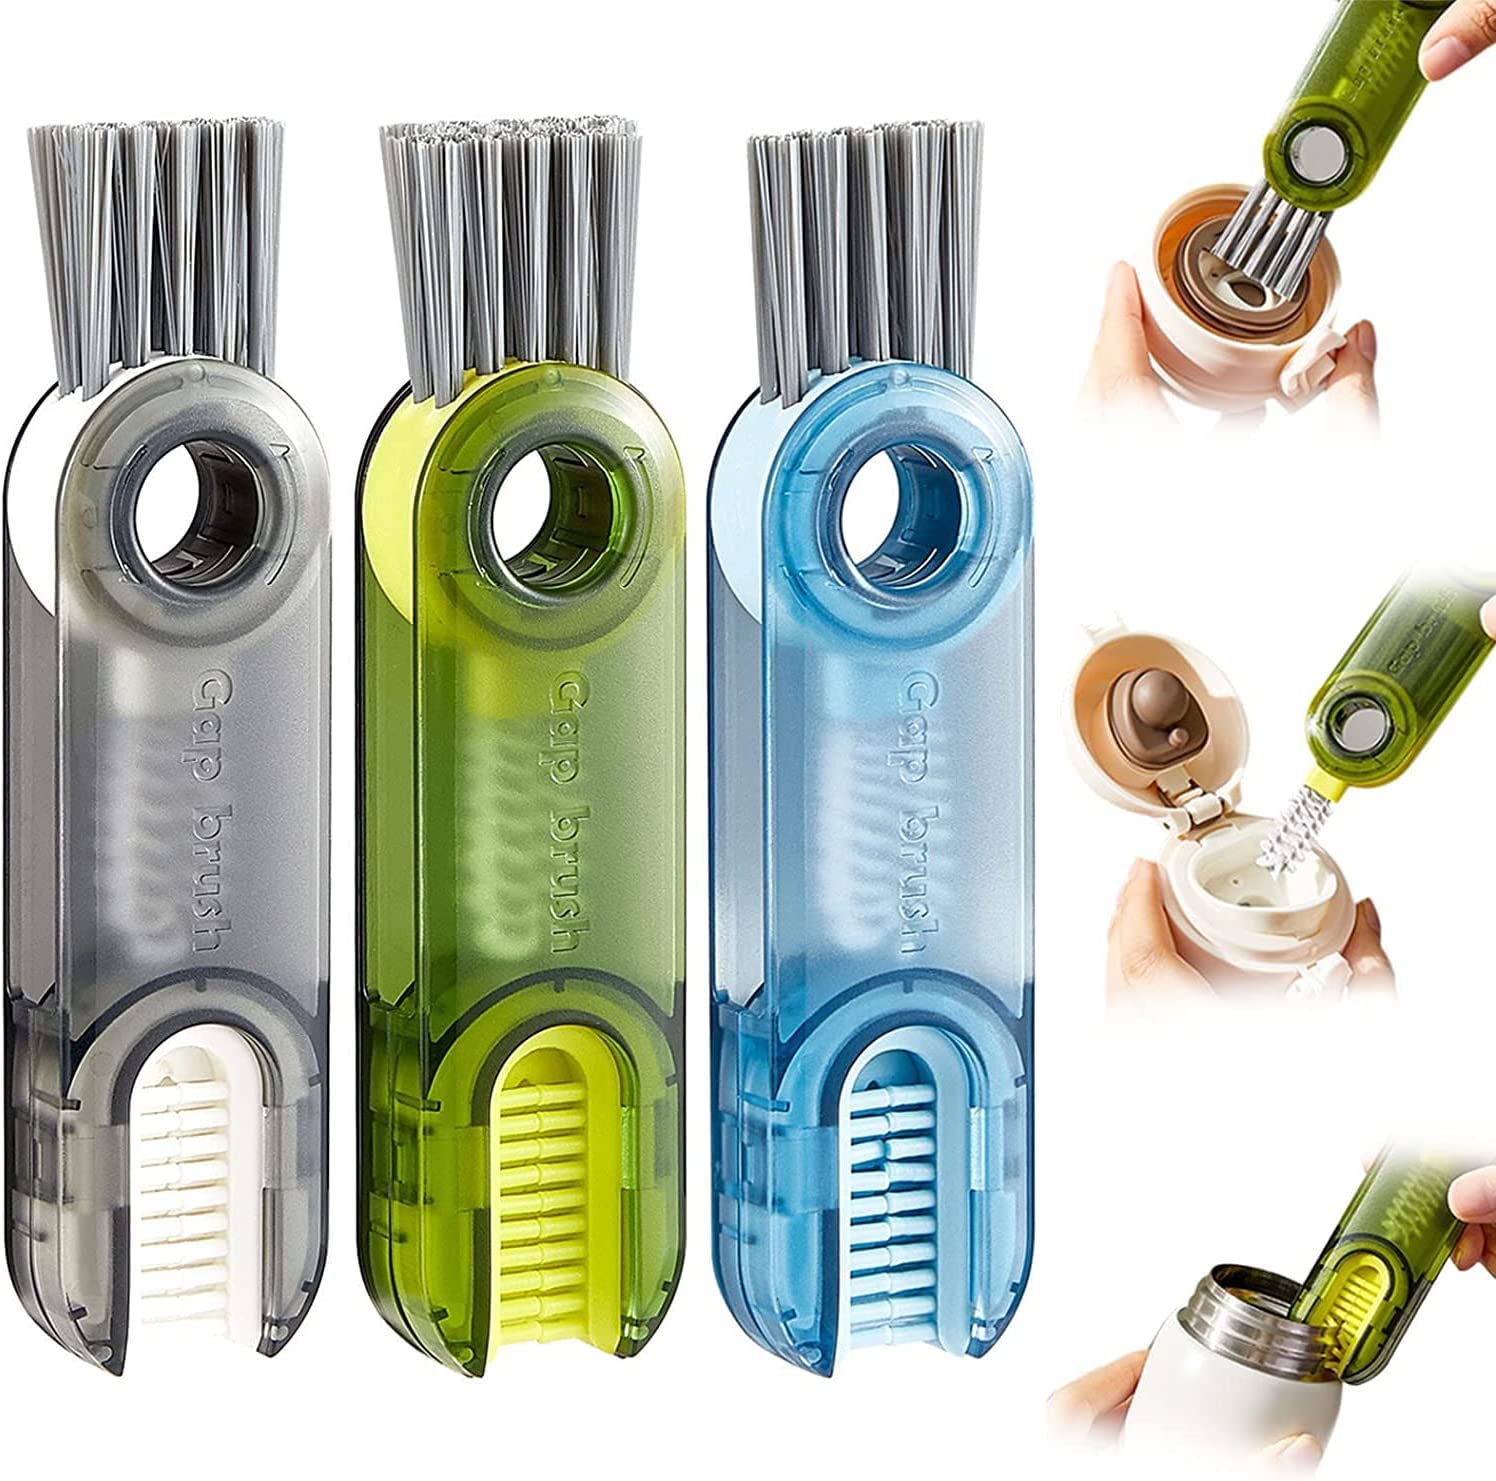 3 in 1 Cup Lid Gap Cleaning Brush Set